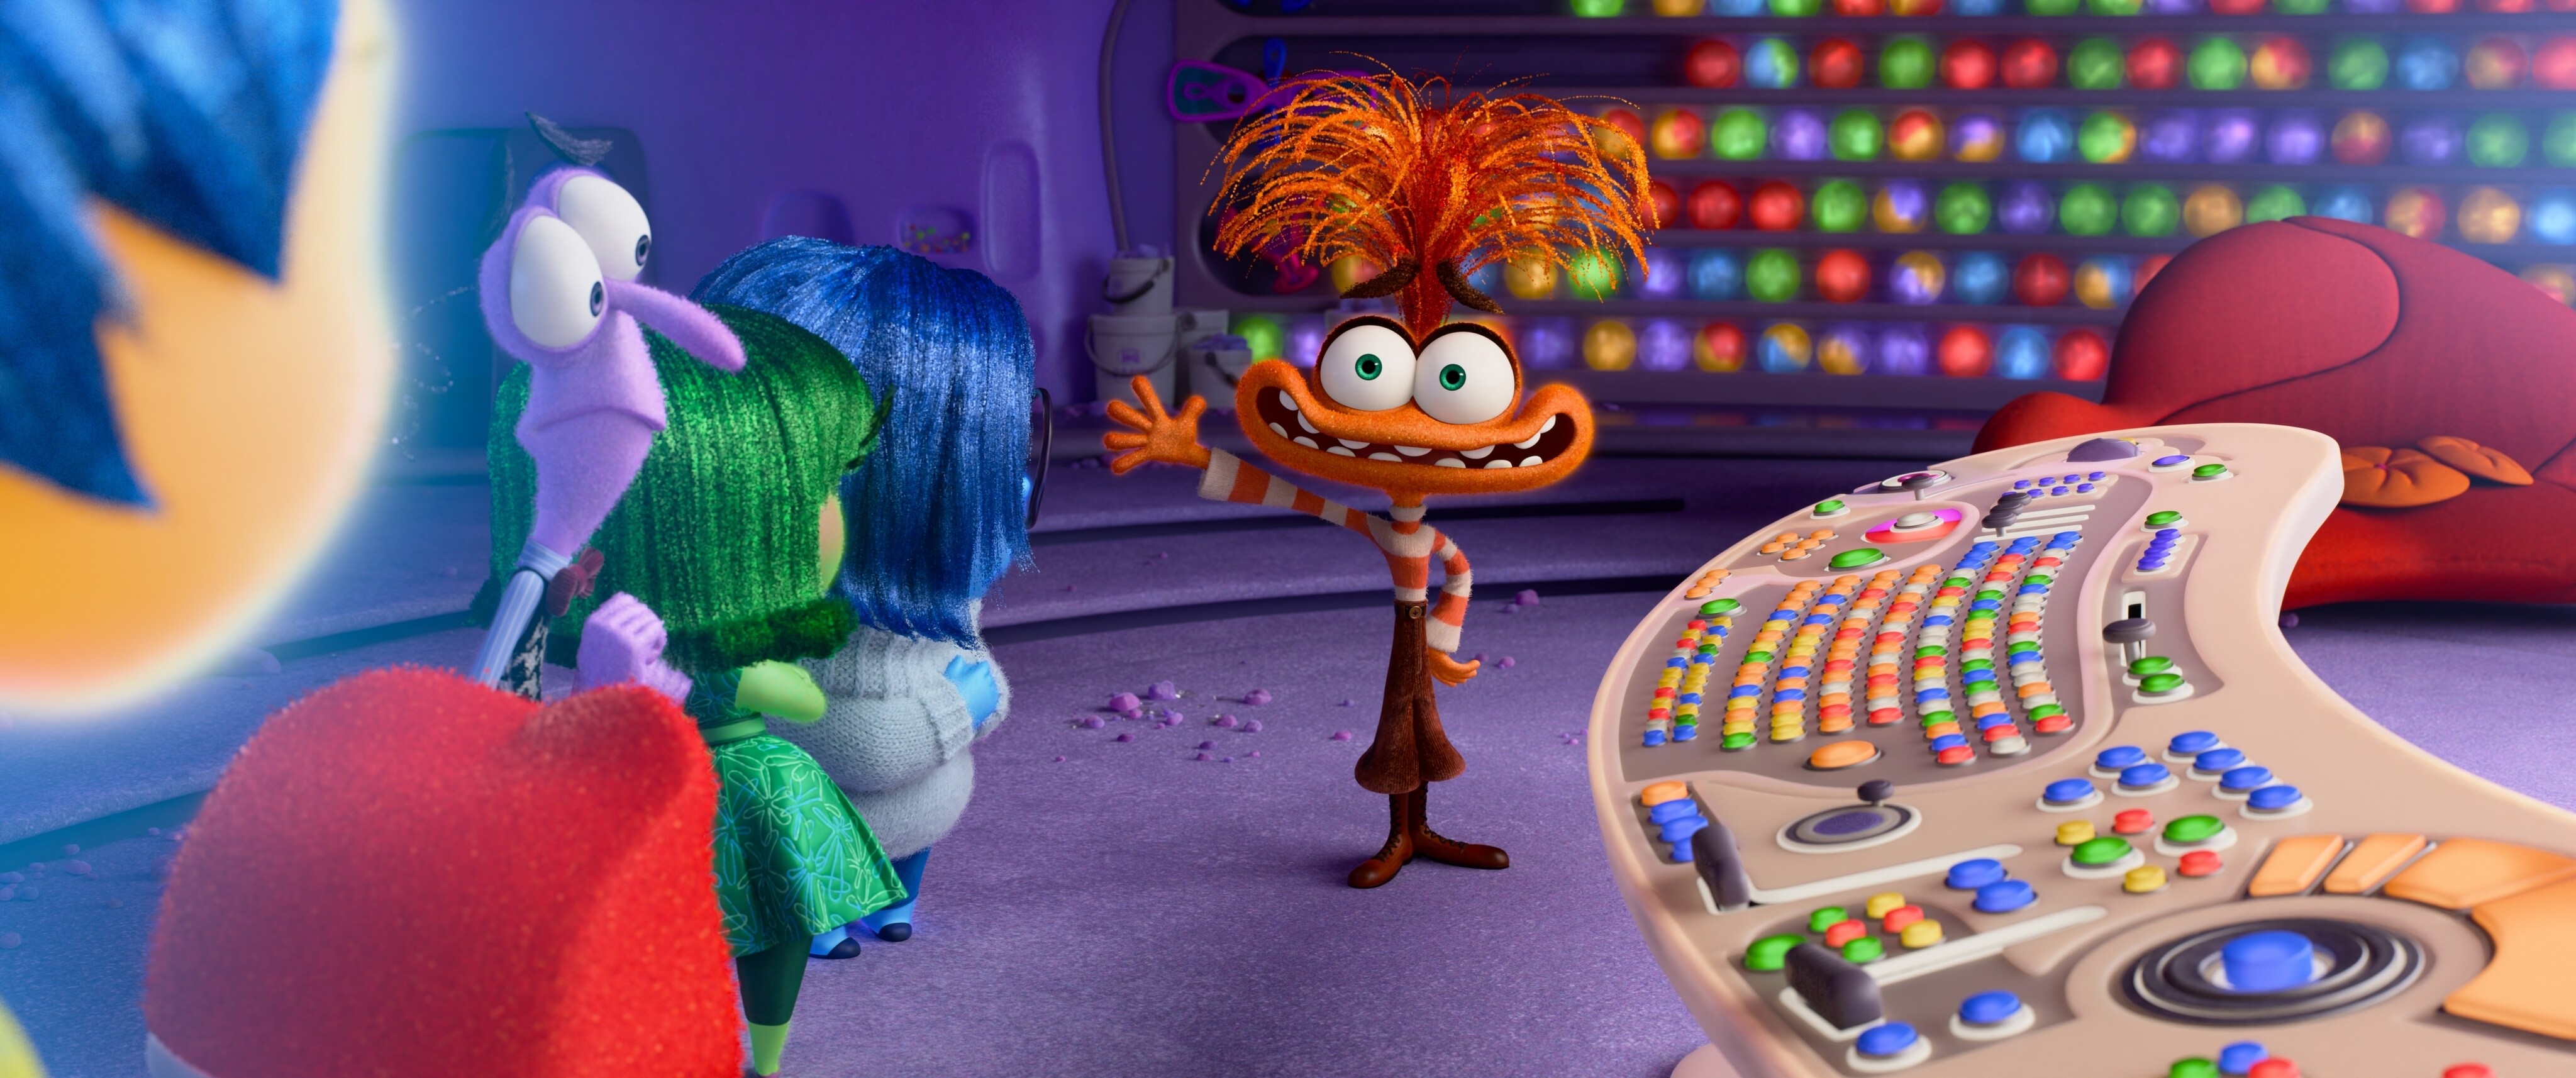 Inside Out 2 - Featured Content Banner - MY